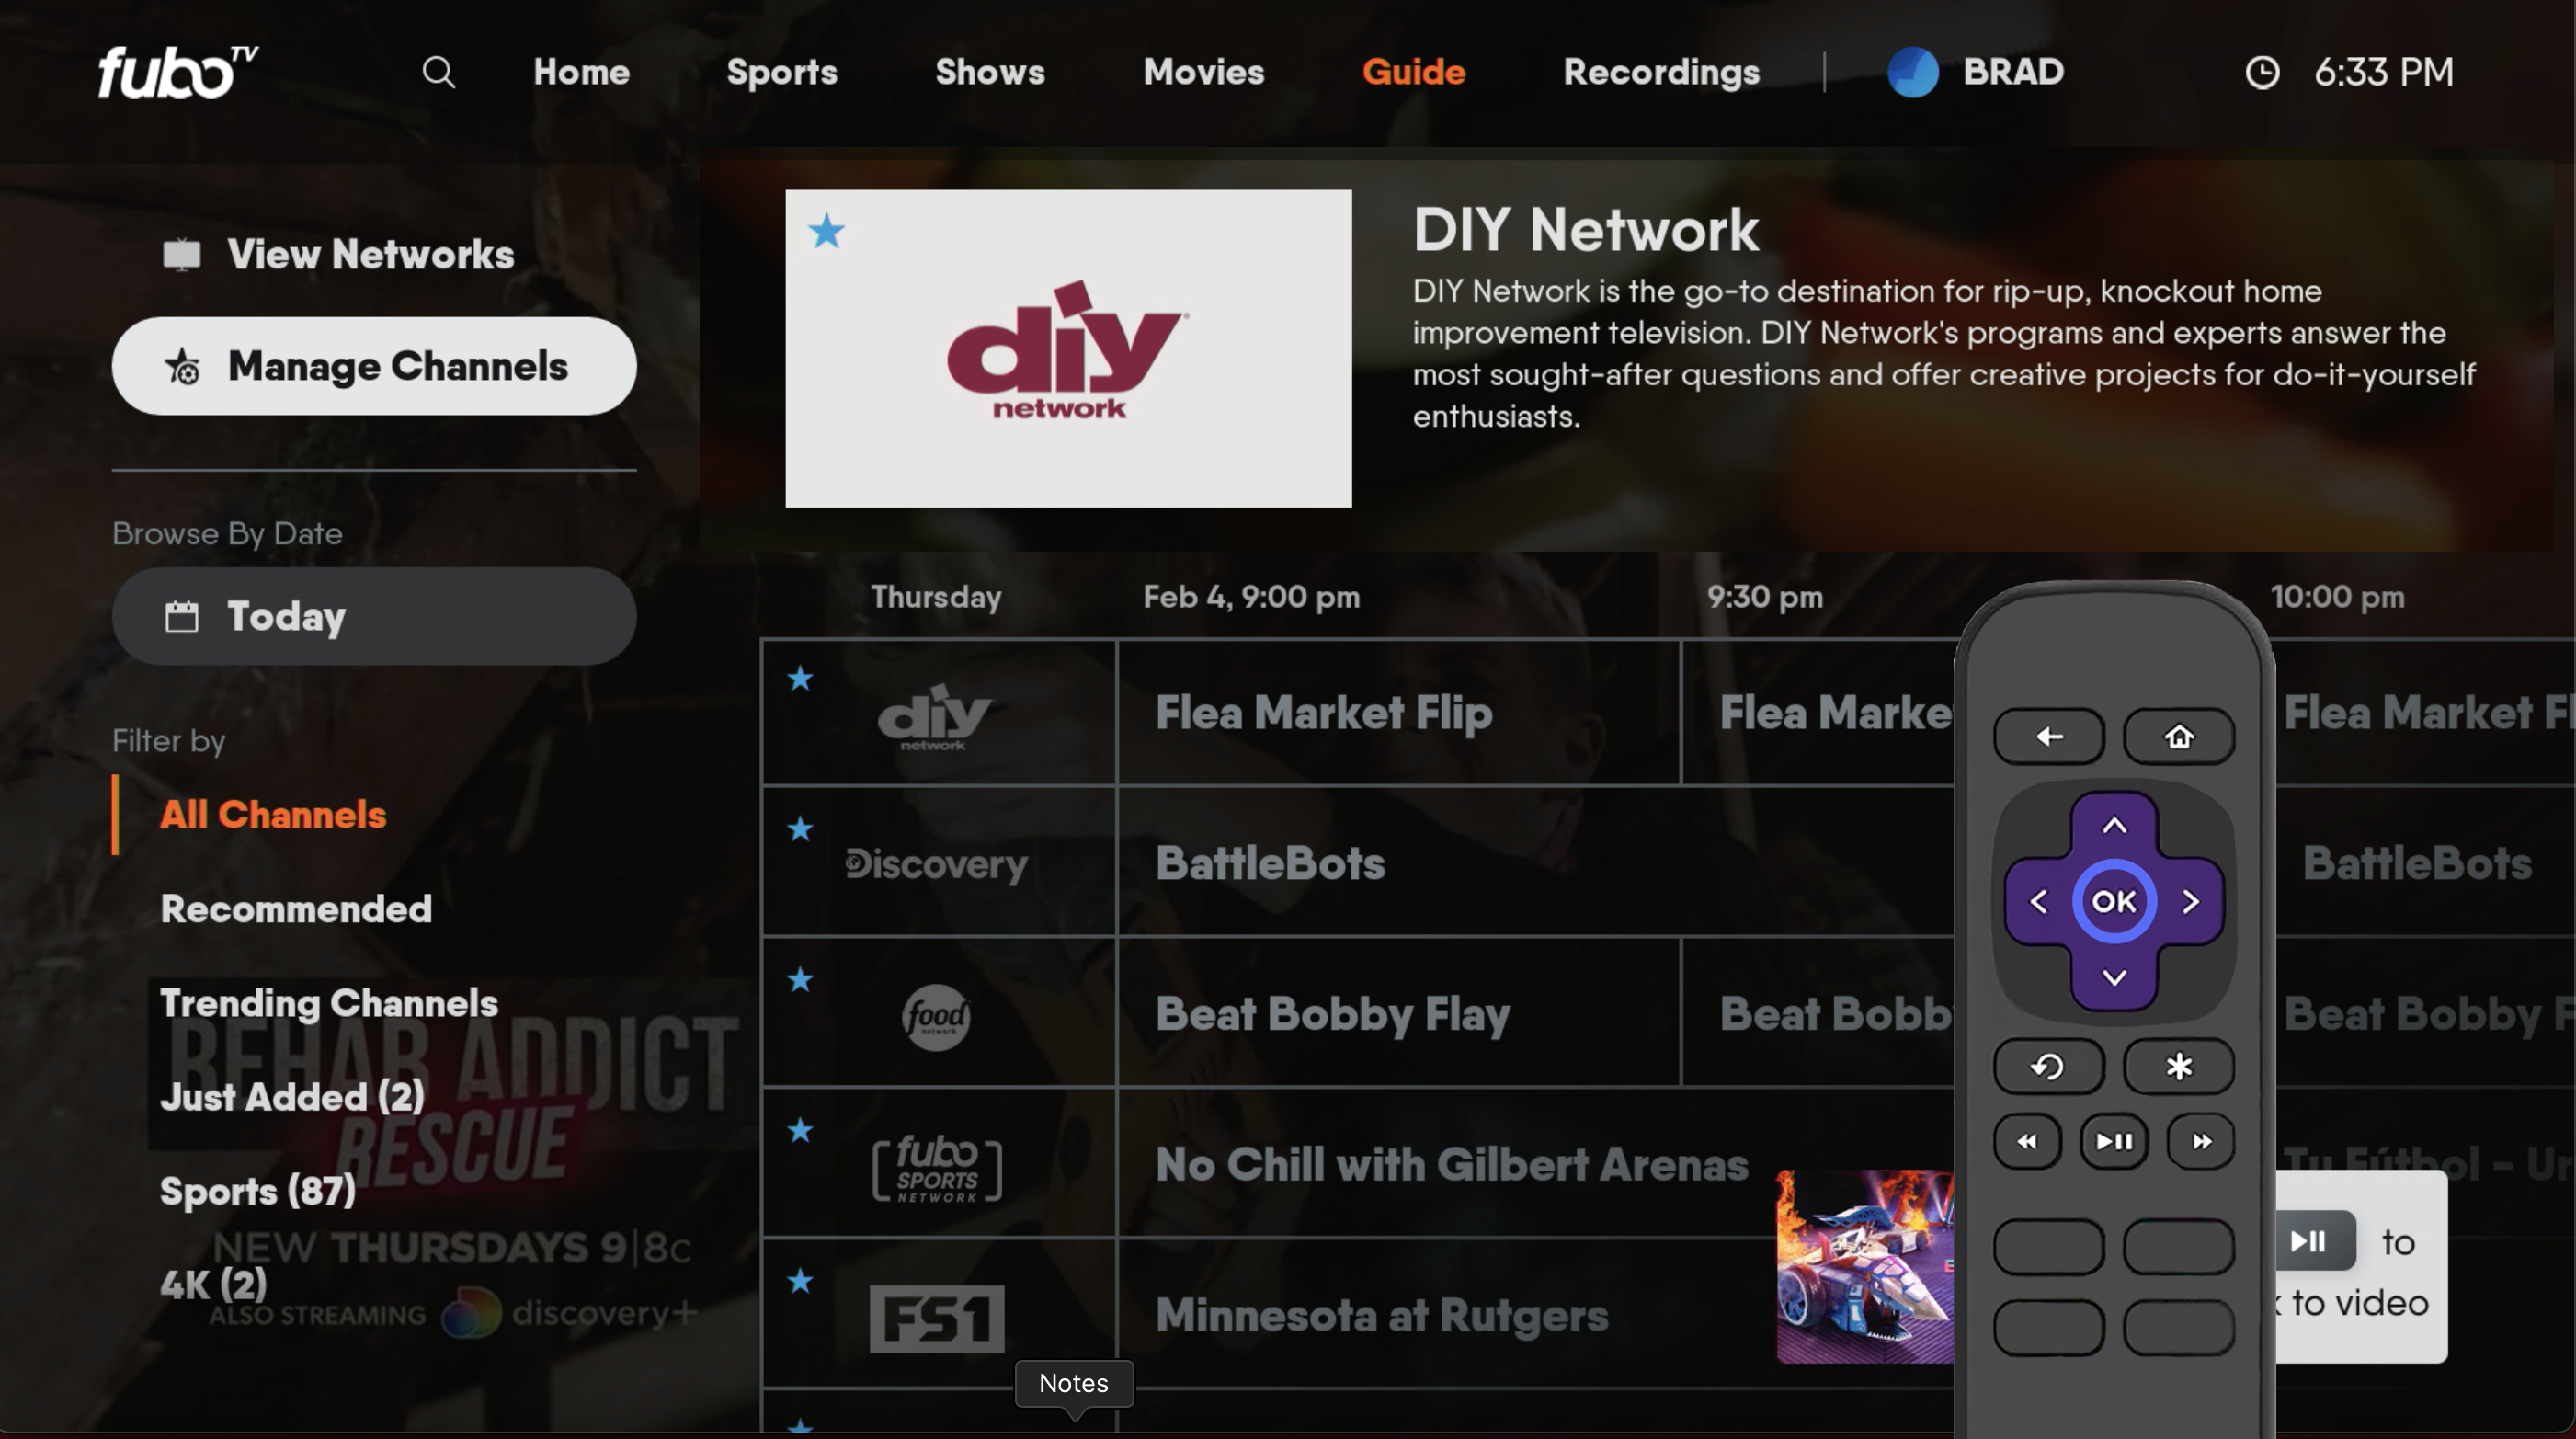 GUIDE screen of the FuboTV app on Roku with MANAGE CHANNELS highlighted along the right; remote overlay with OK button highlighted